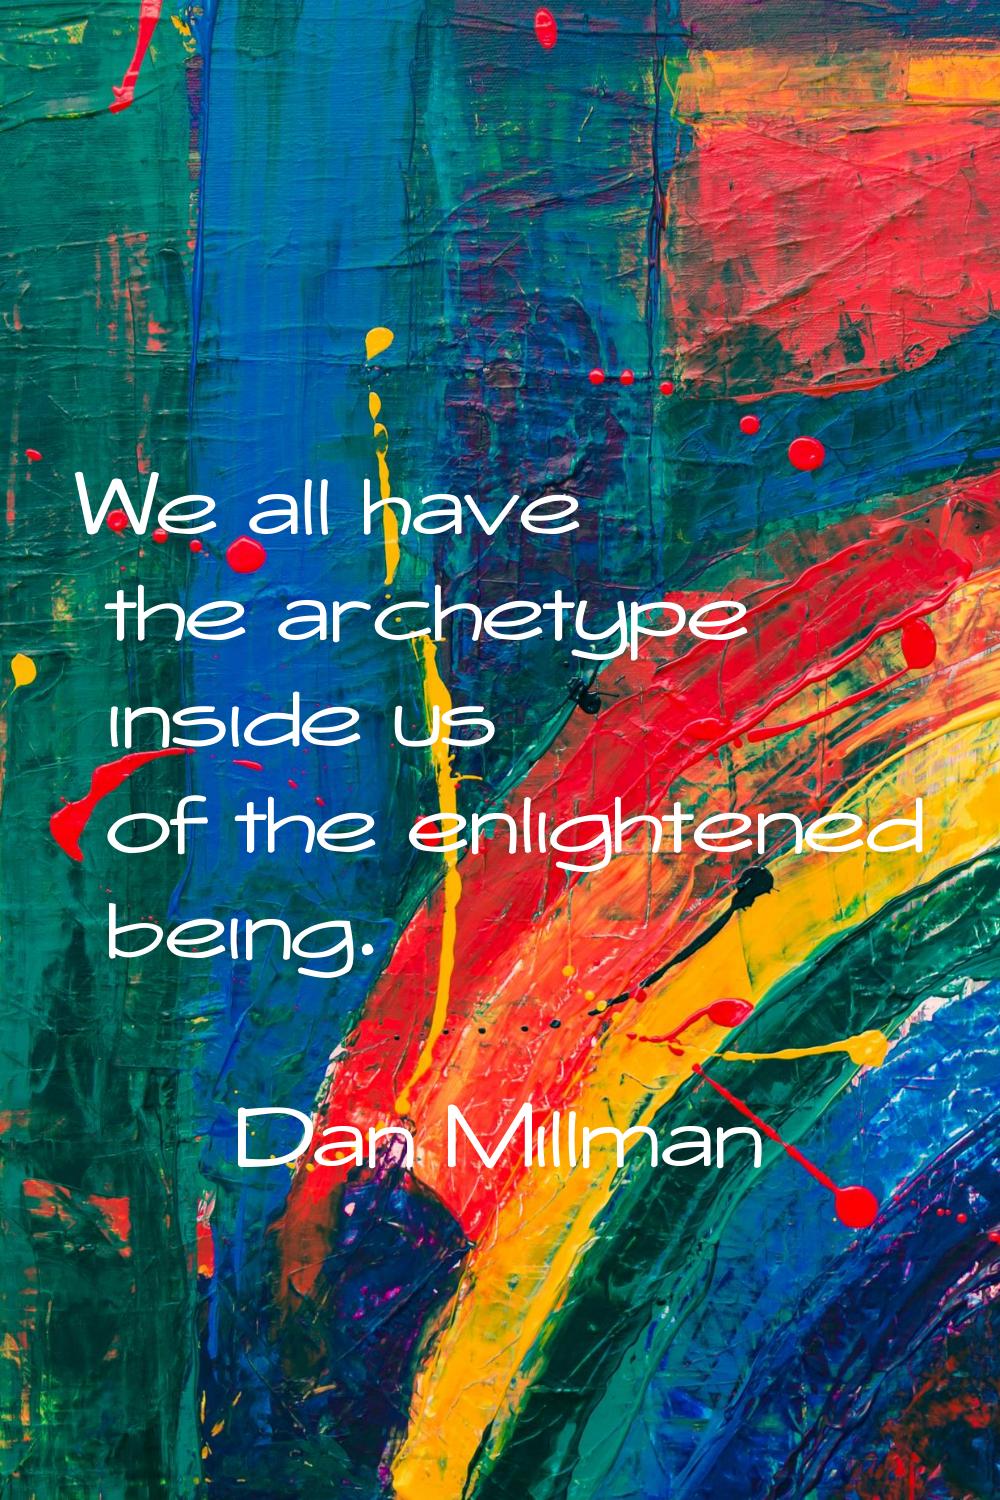 We all have the archetype inside us of the enlightened being.